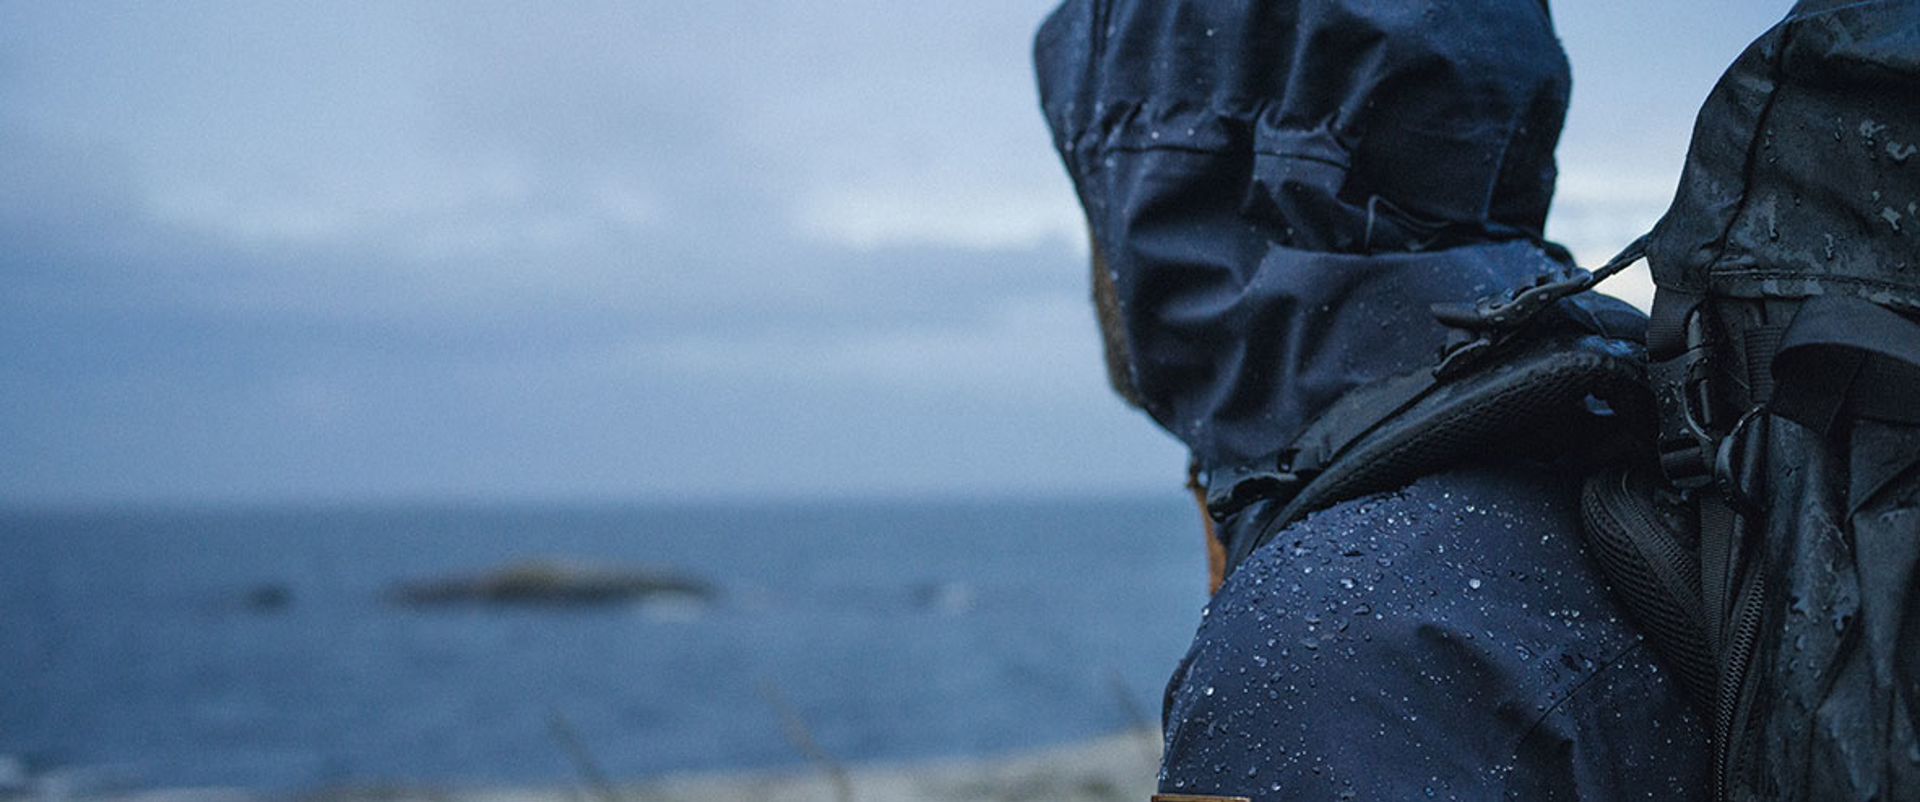 Man overlooking water with jacket repelling water droplets